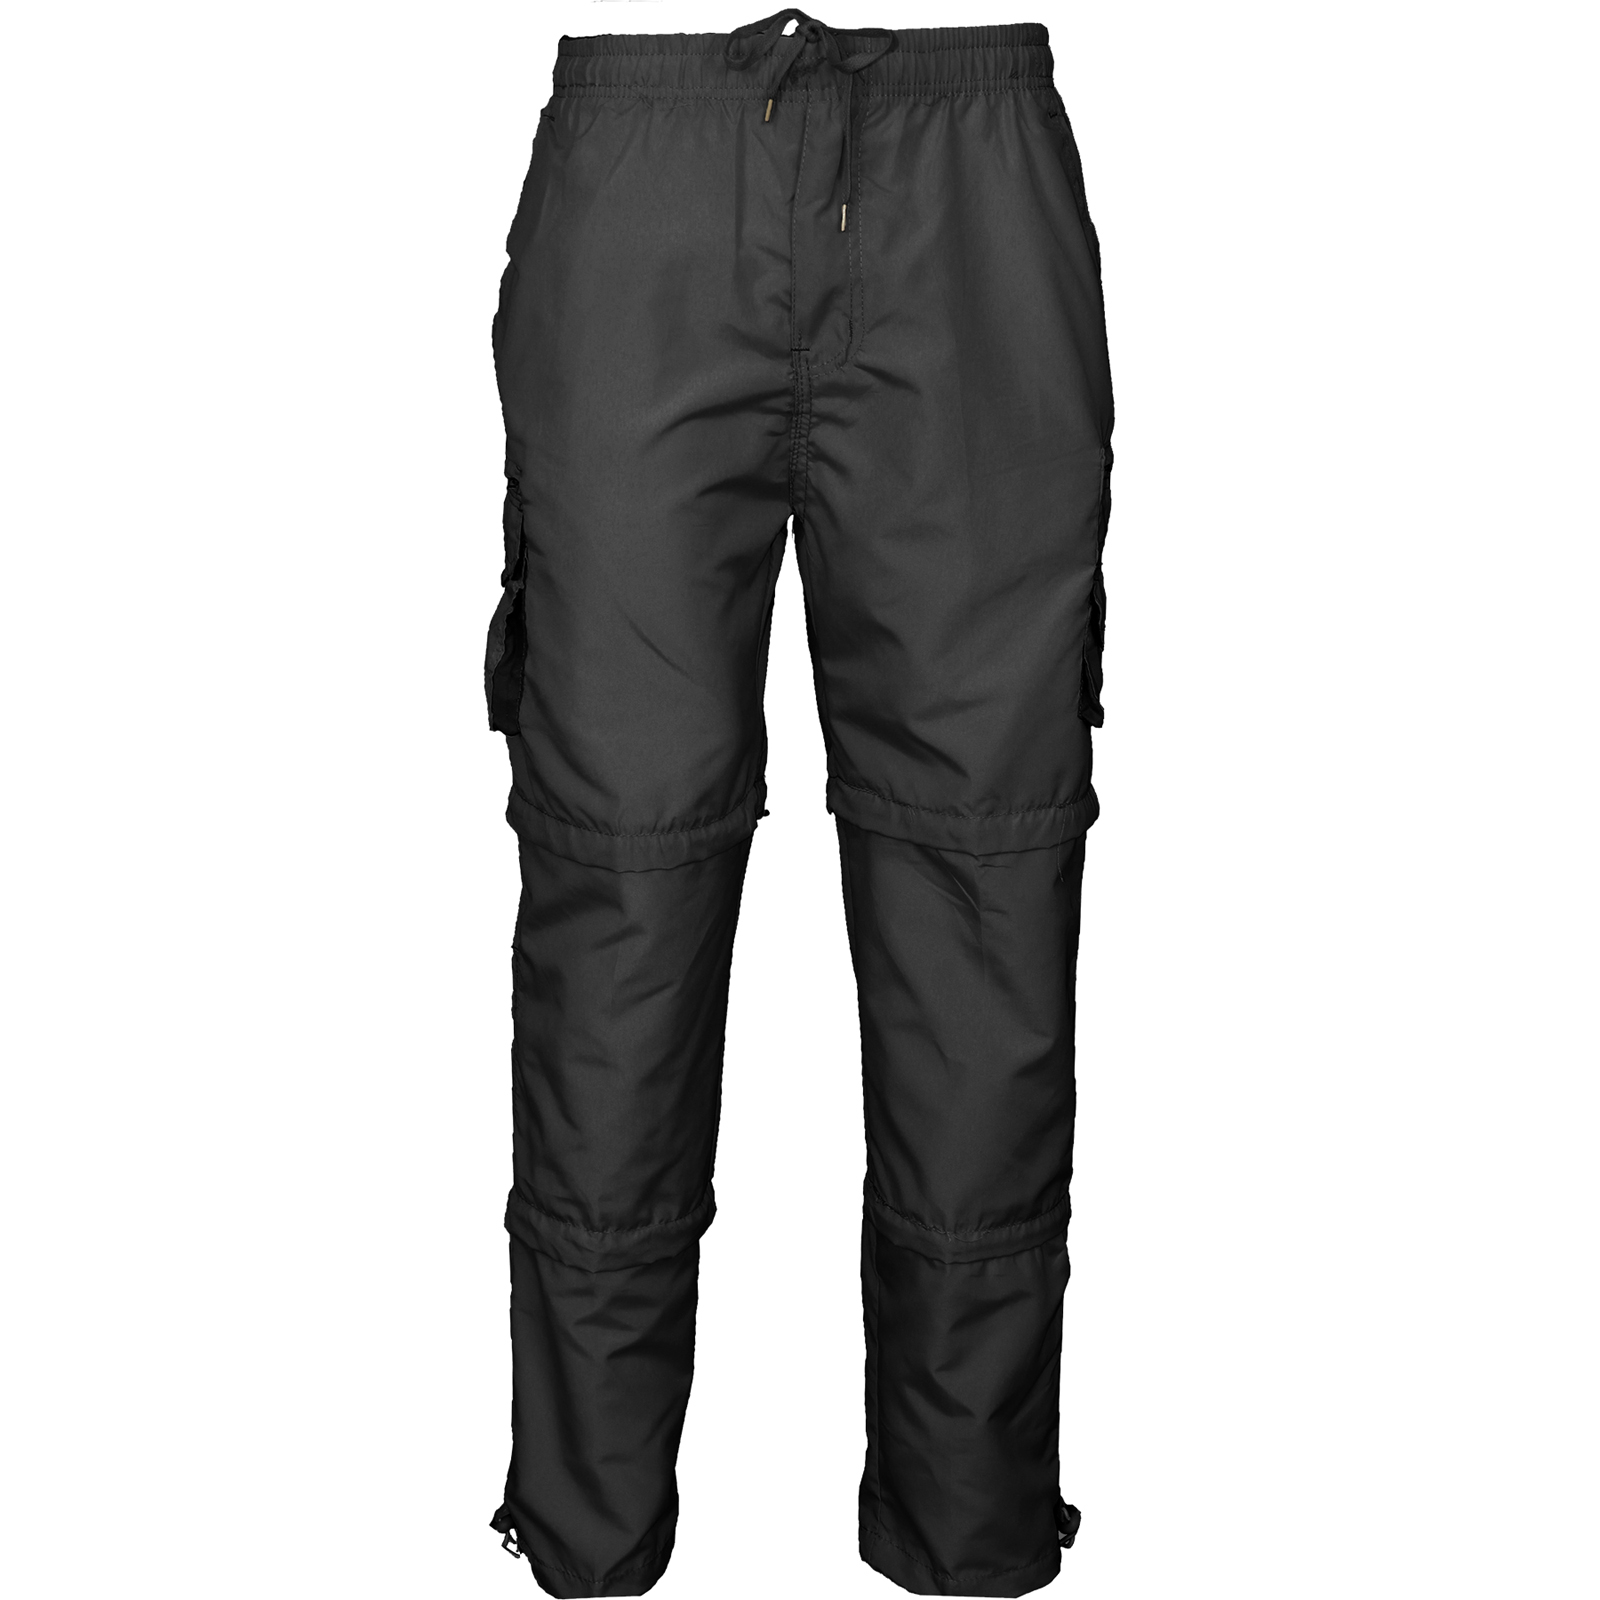 XXXL Mens Cargo Combat Casual Elasticated Waist Trousers Pants Rugby Bottoms M 